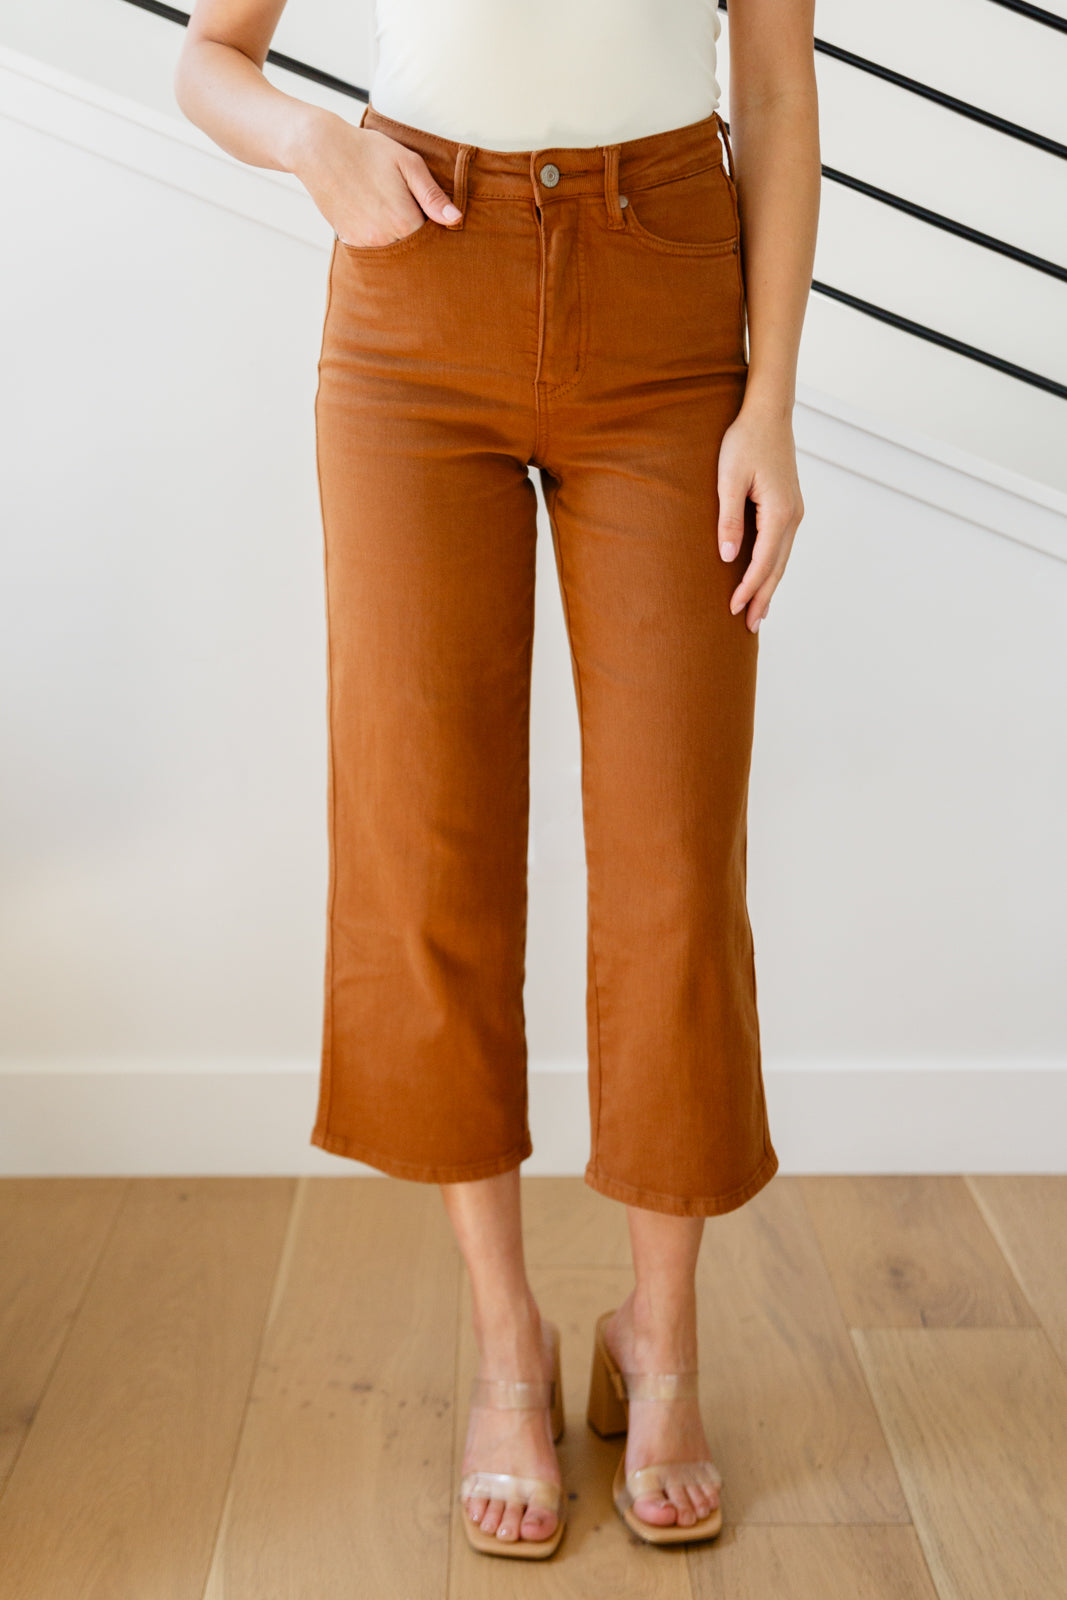 Discover your new favorite jeans with Briar's High Rise Control Top Wide Leg Crop Jeans from Judy Blue. Our triple threat of design, fit, and color come together for maximum style, comfort, and chicness. Features include high rise, tummy control tech, and a wide leg crop in a warm rich garment-dyed camel. Complete with coordinating hardware and you're ready to look and feel amazing! 0 - 24W